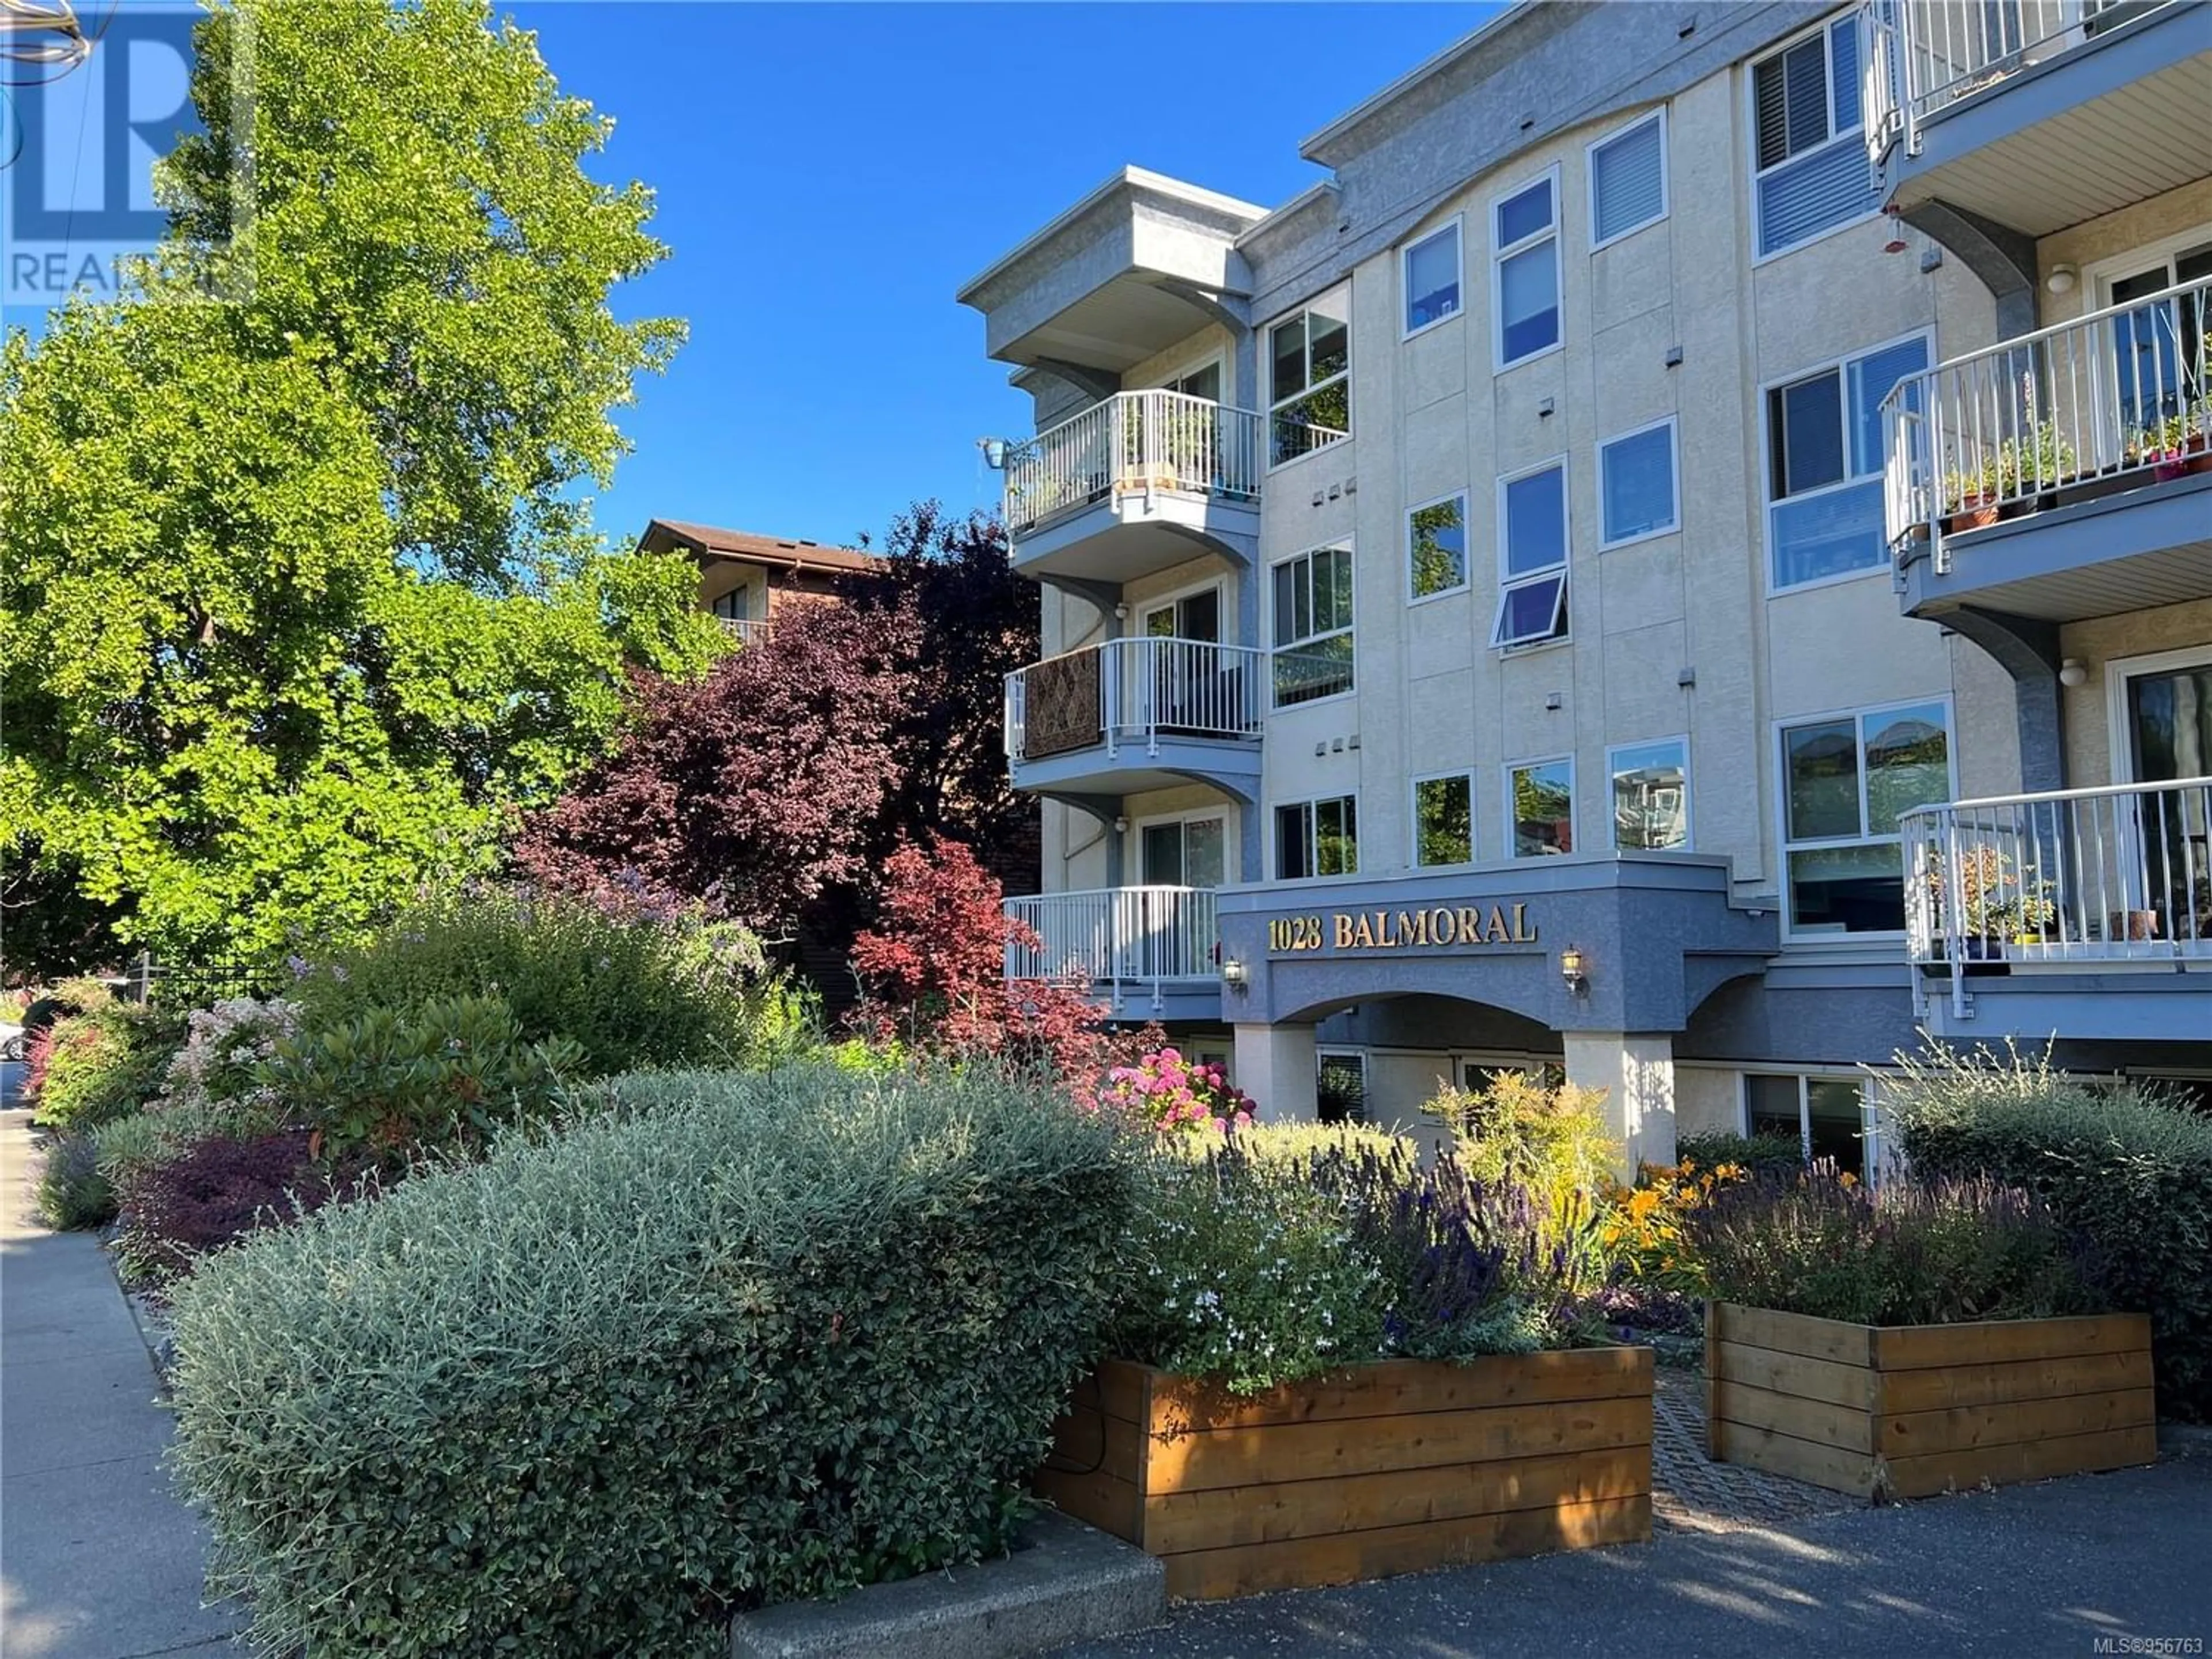 A pic from exterior of the house or condo for 402 1028 Balmoral Rd, Victoria British Columbia V8T1A8